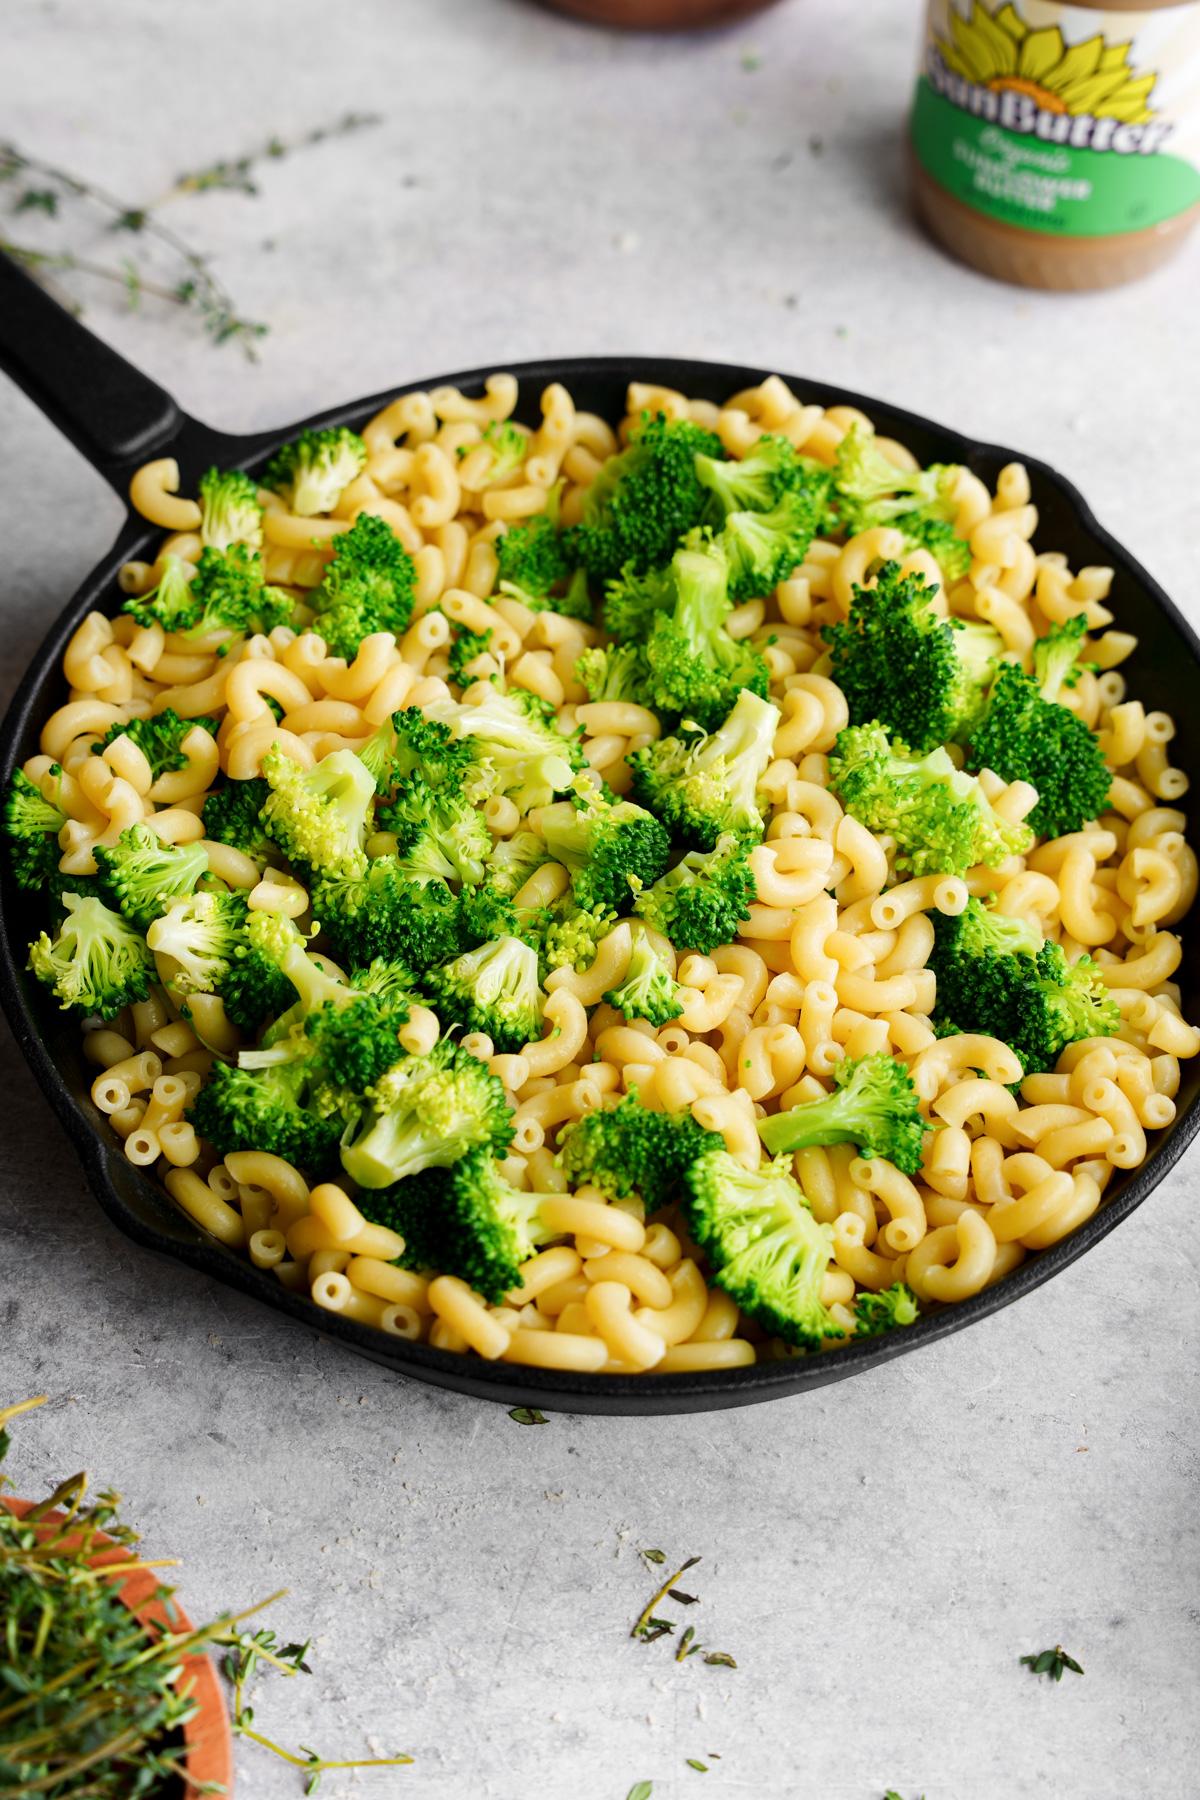 combining the broccoli and macaroni noodles